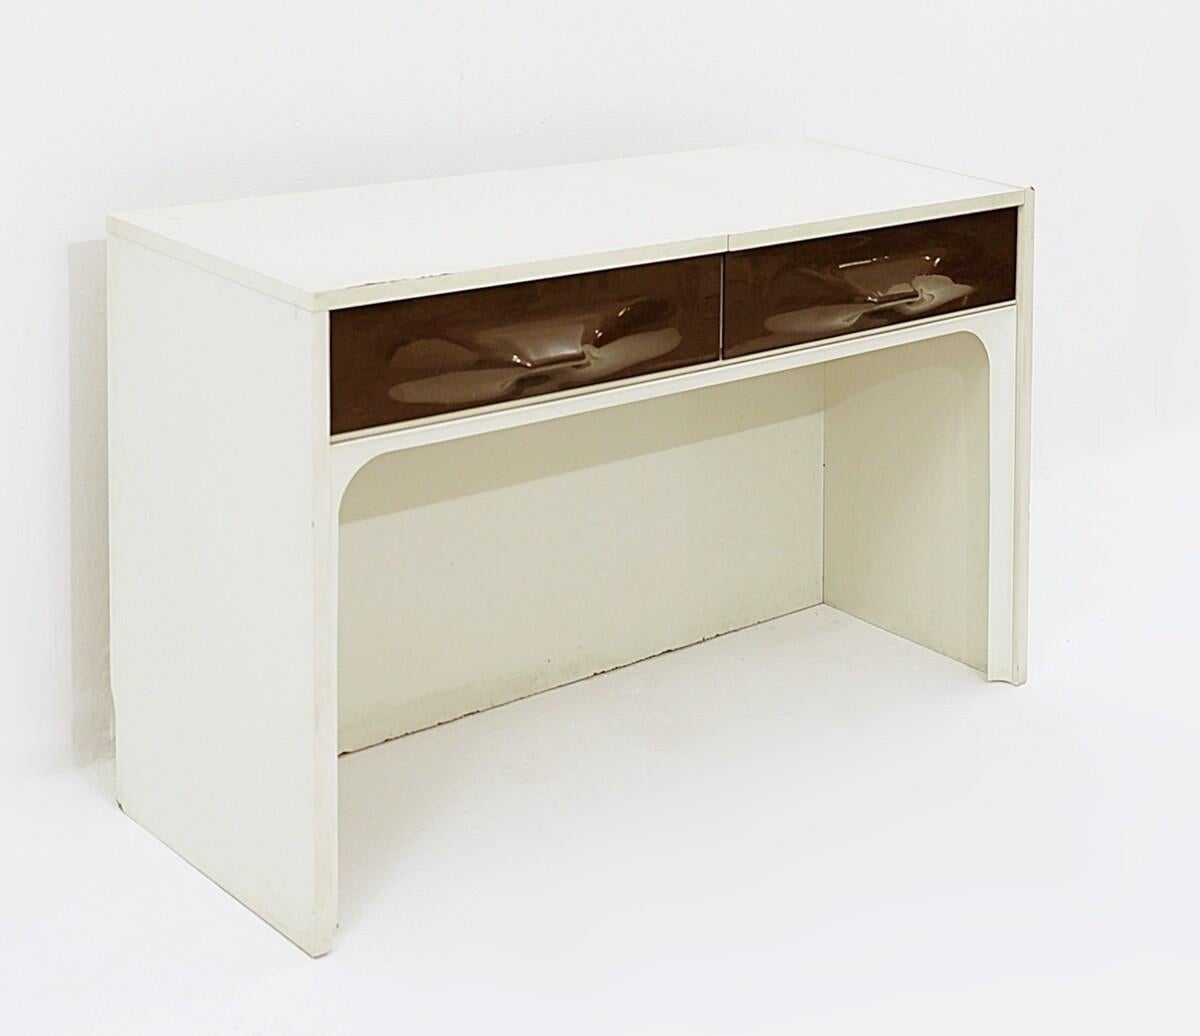 Dressing table by Raymond Loewy, model 